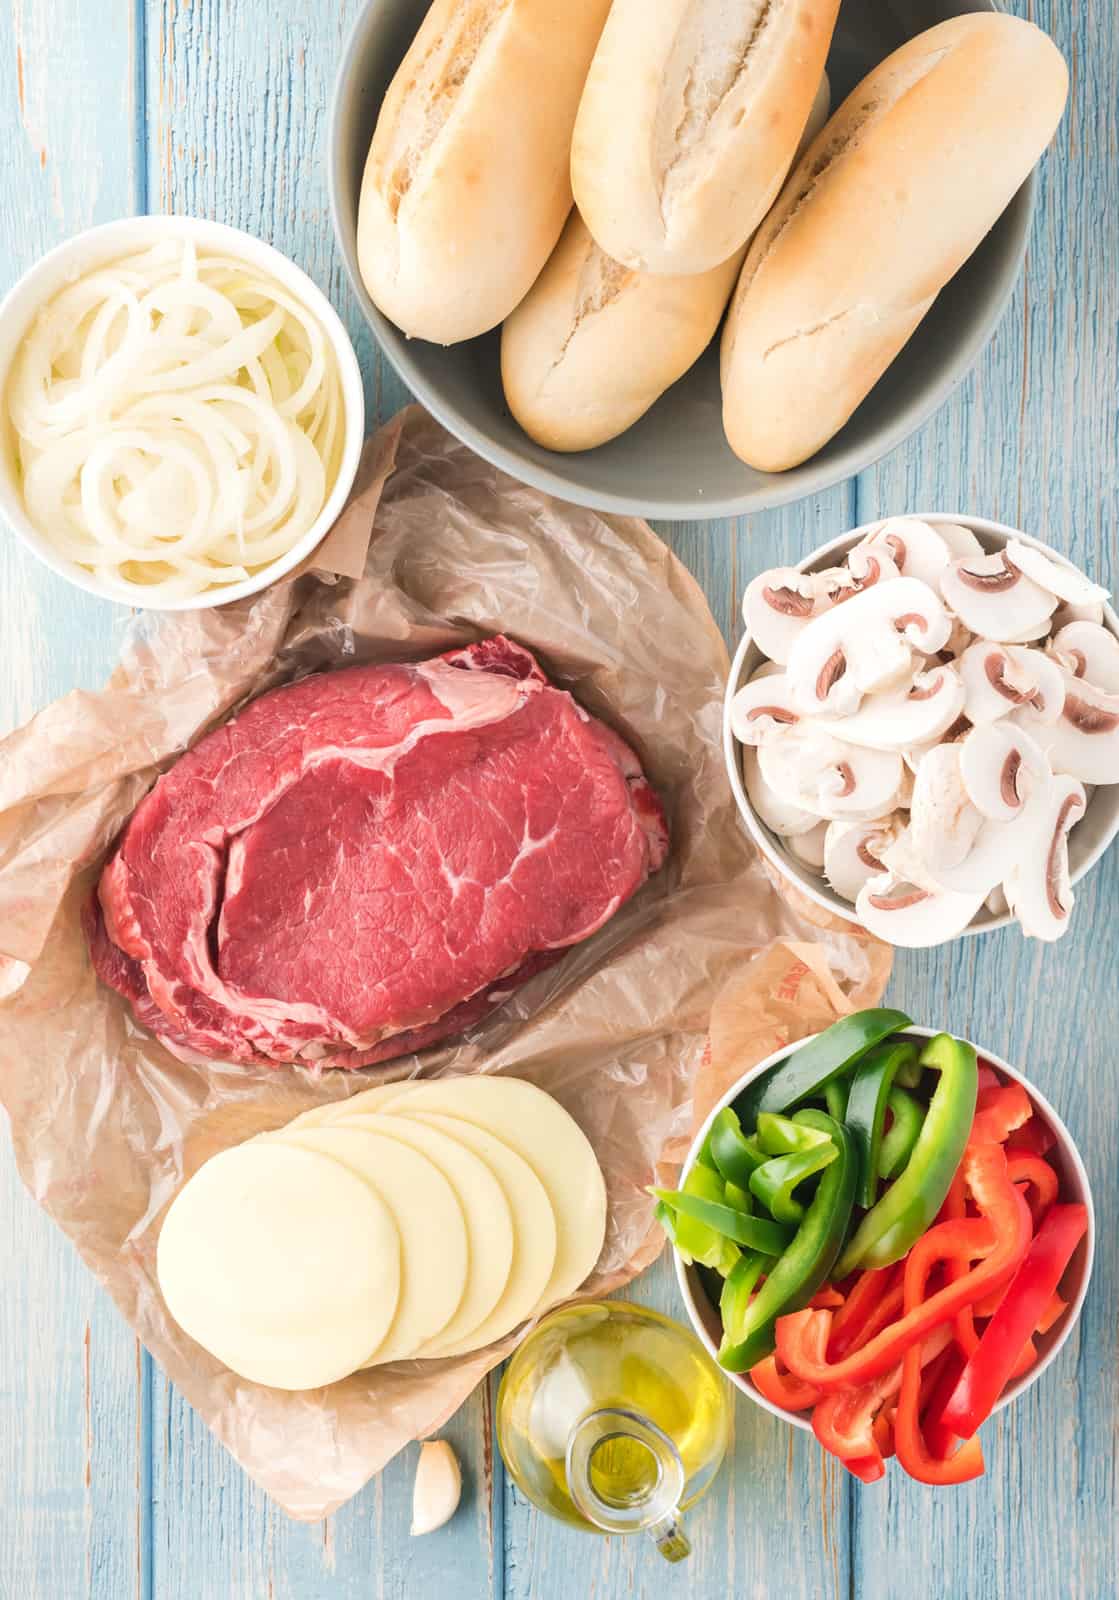 Ingredients needed to make a Philly Cheesesteak Recipe